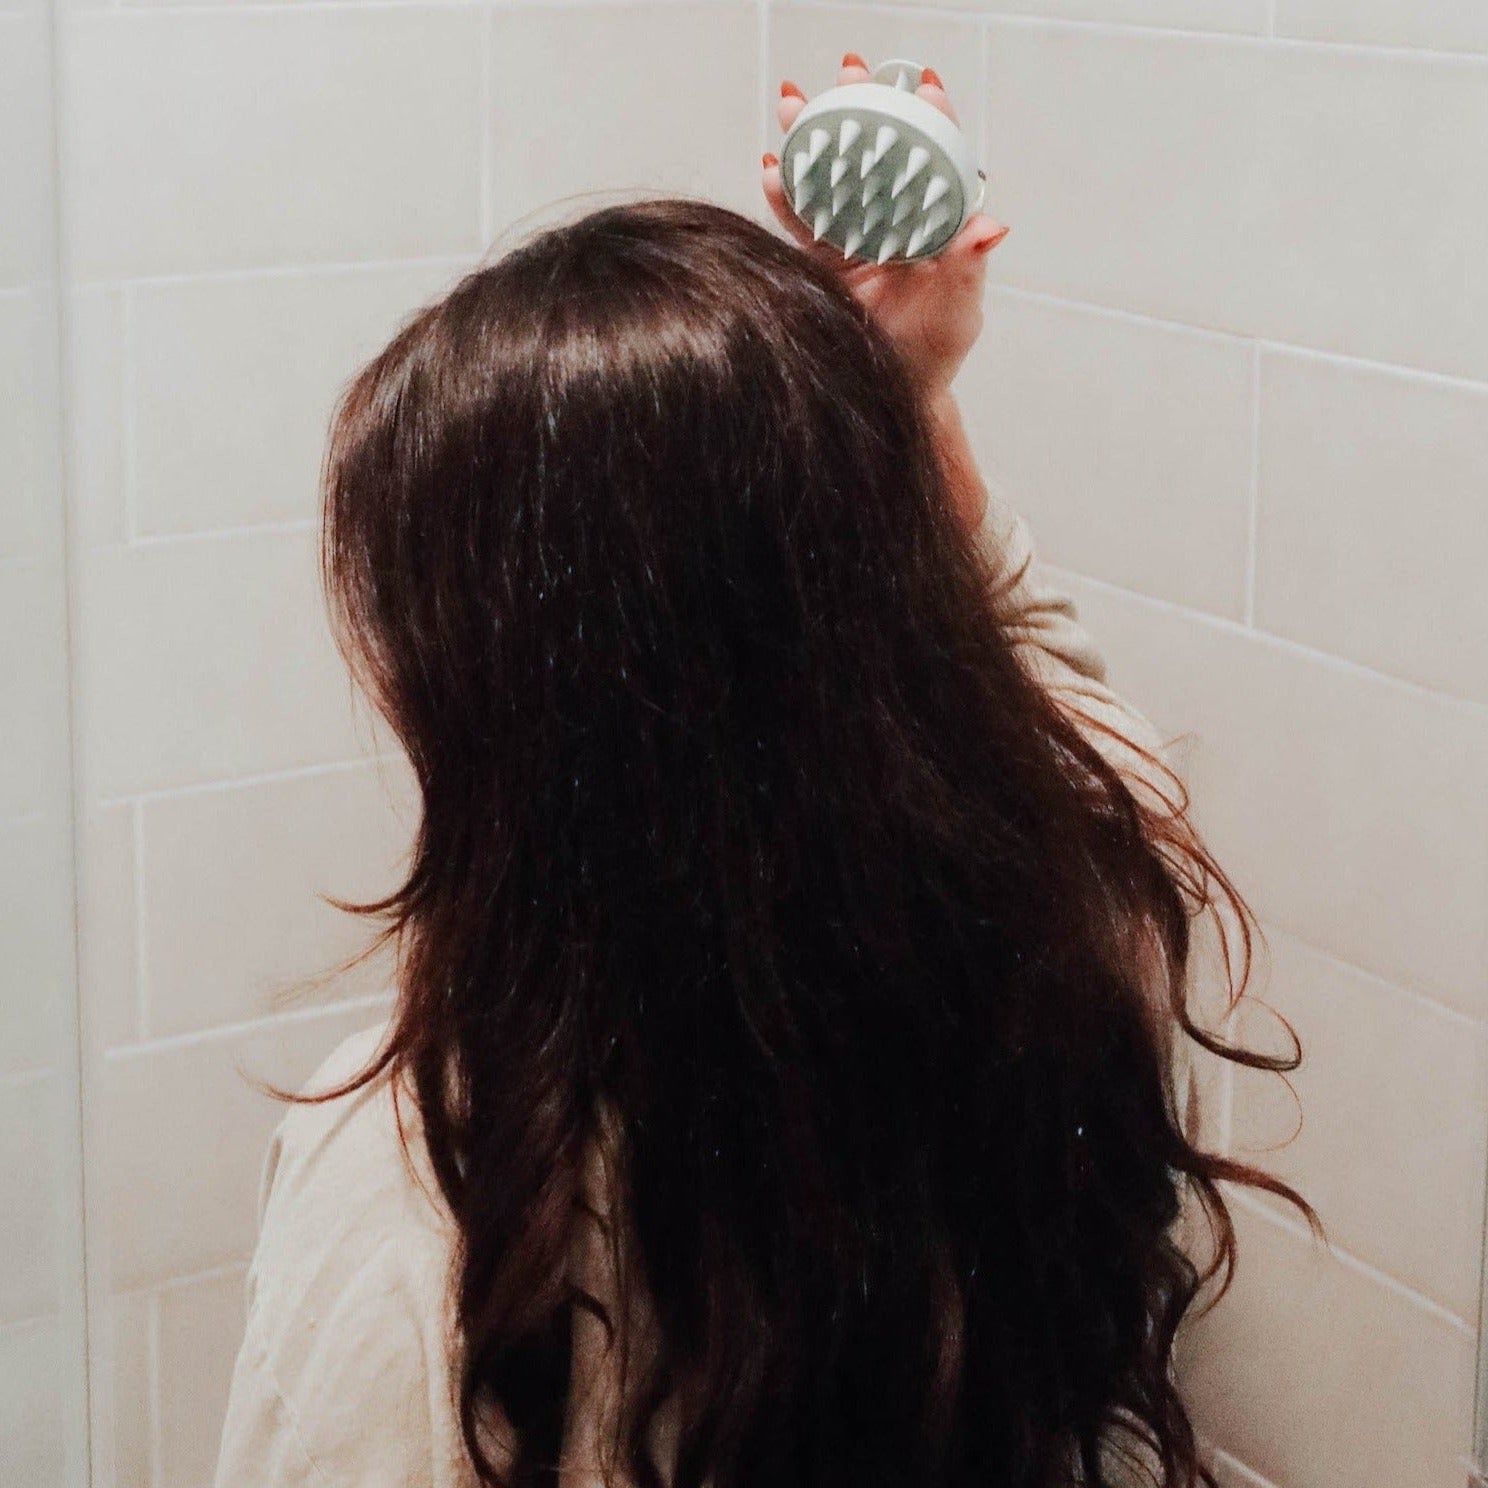 A woman with long wavy brown hair using a sage green scalp massager to massage the back of her head.